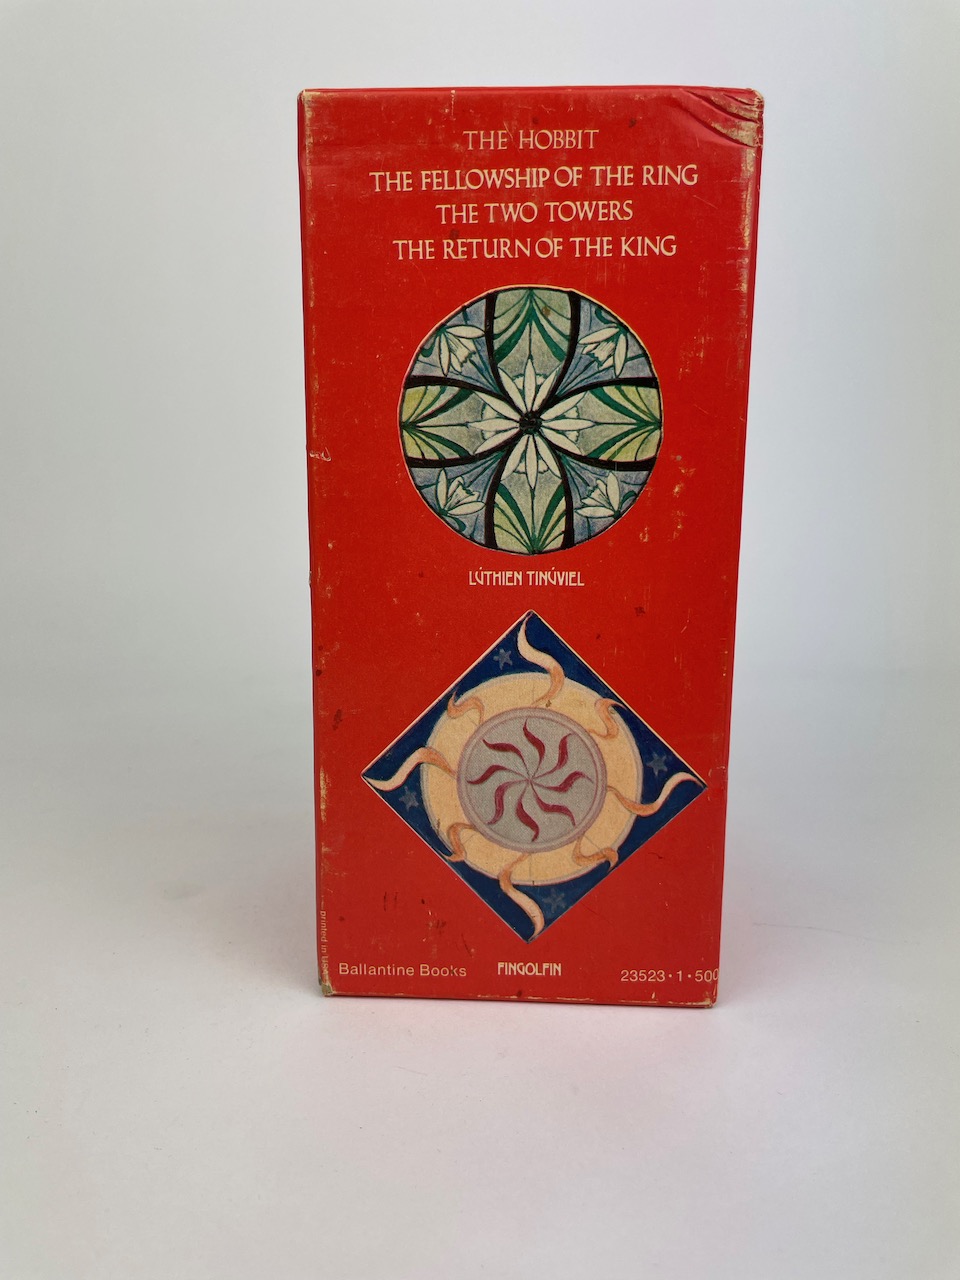 The Hobbit and The Lord of the Rings, Four Paperback Book Boxset from 1973, Red Slipcase 6